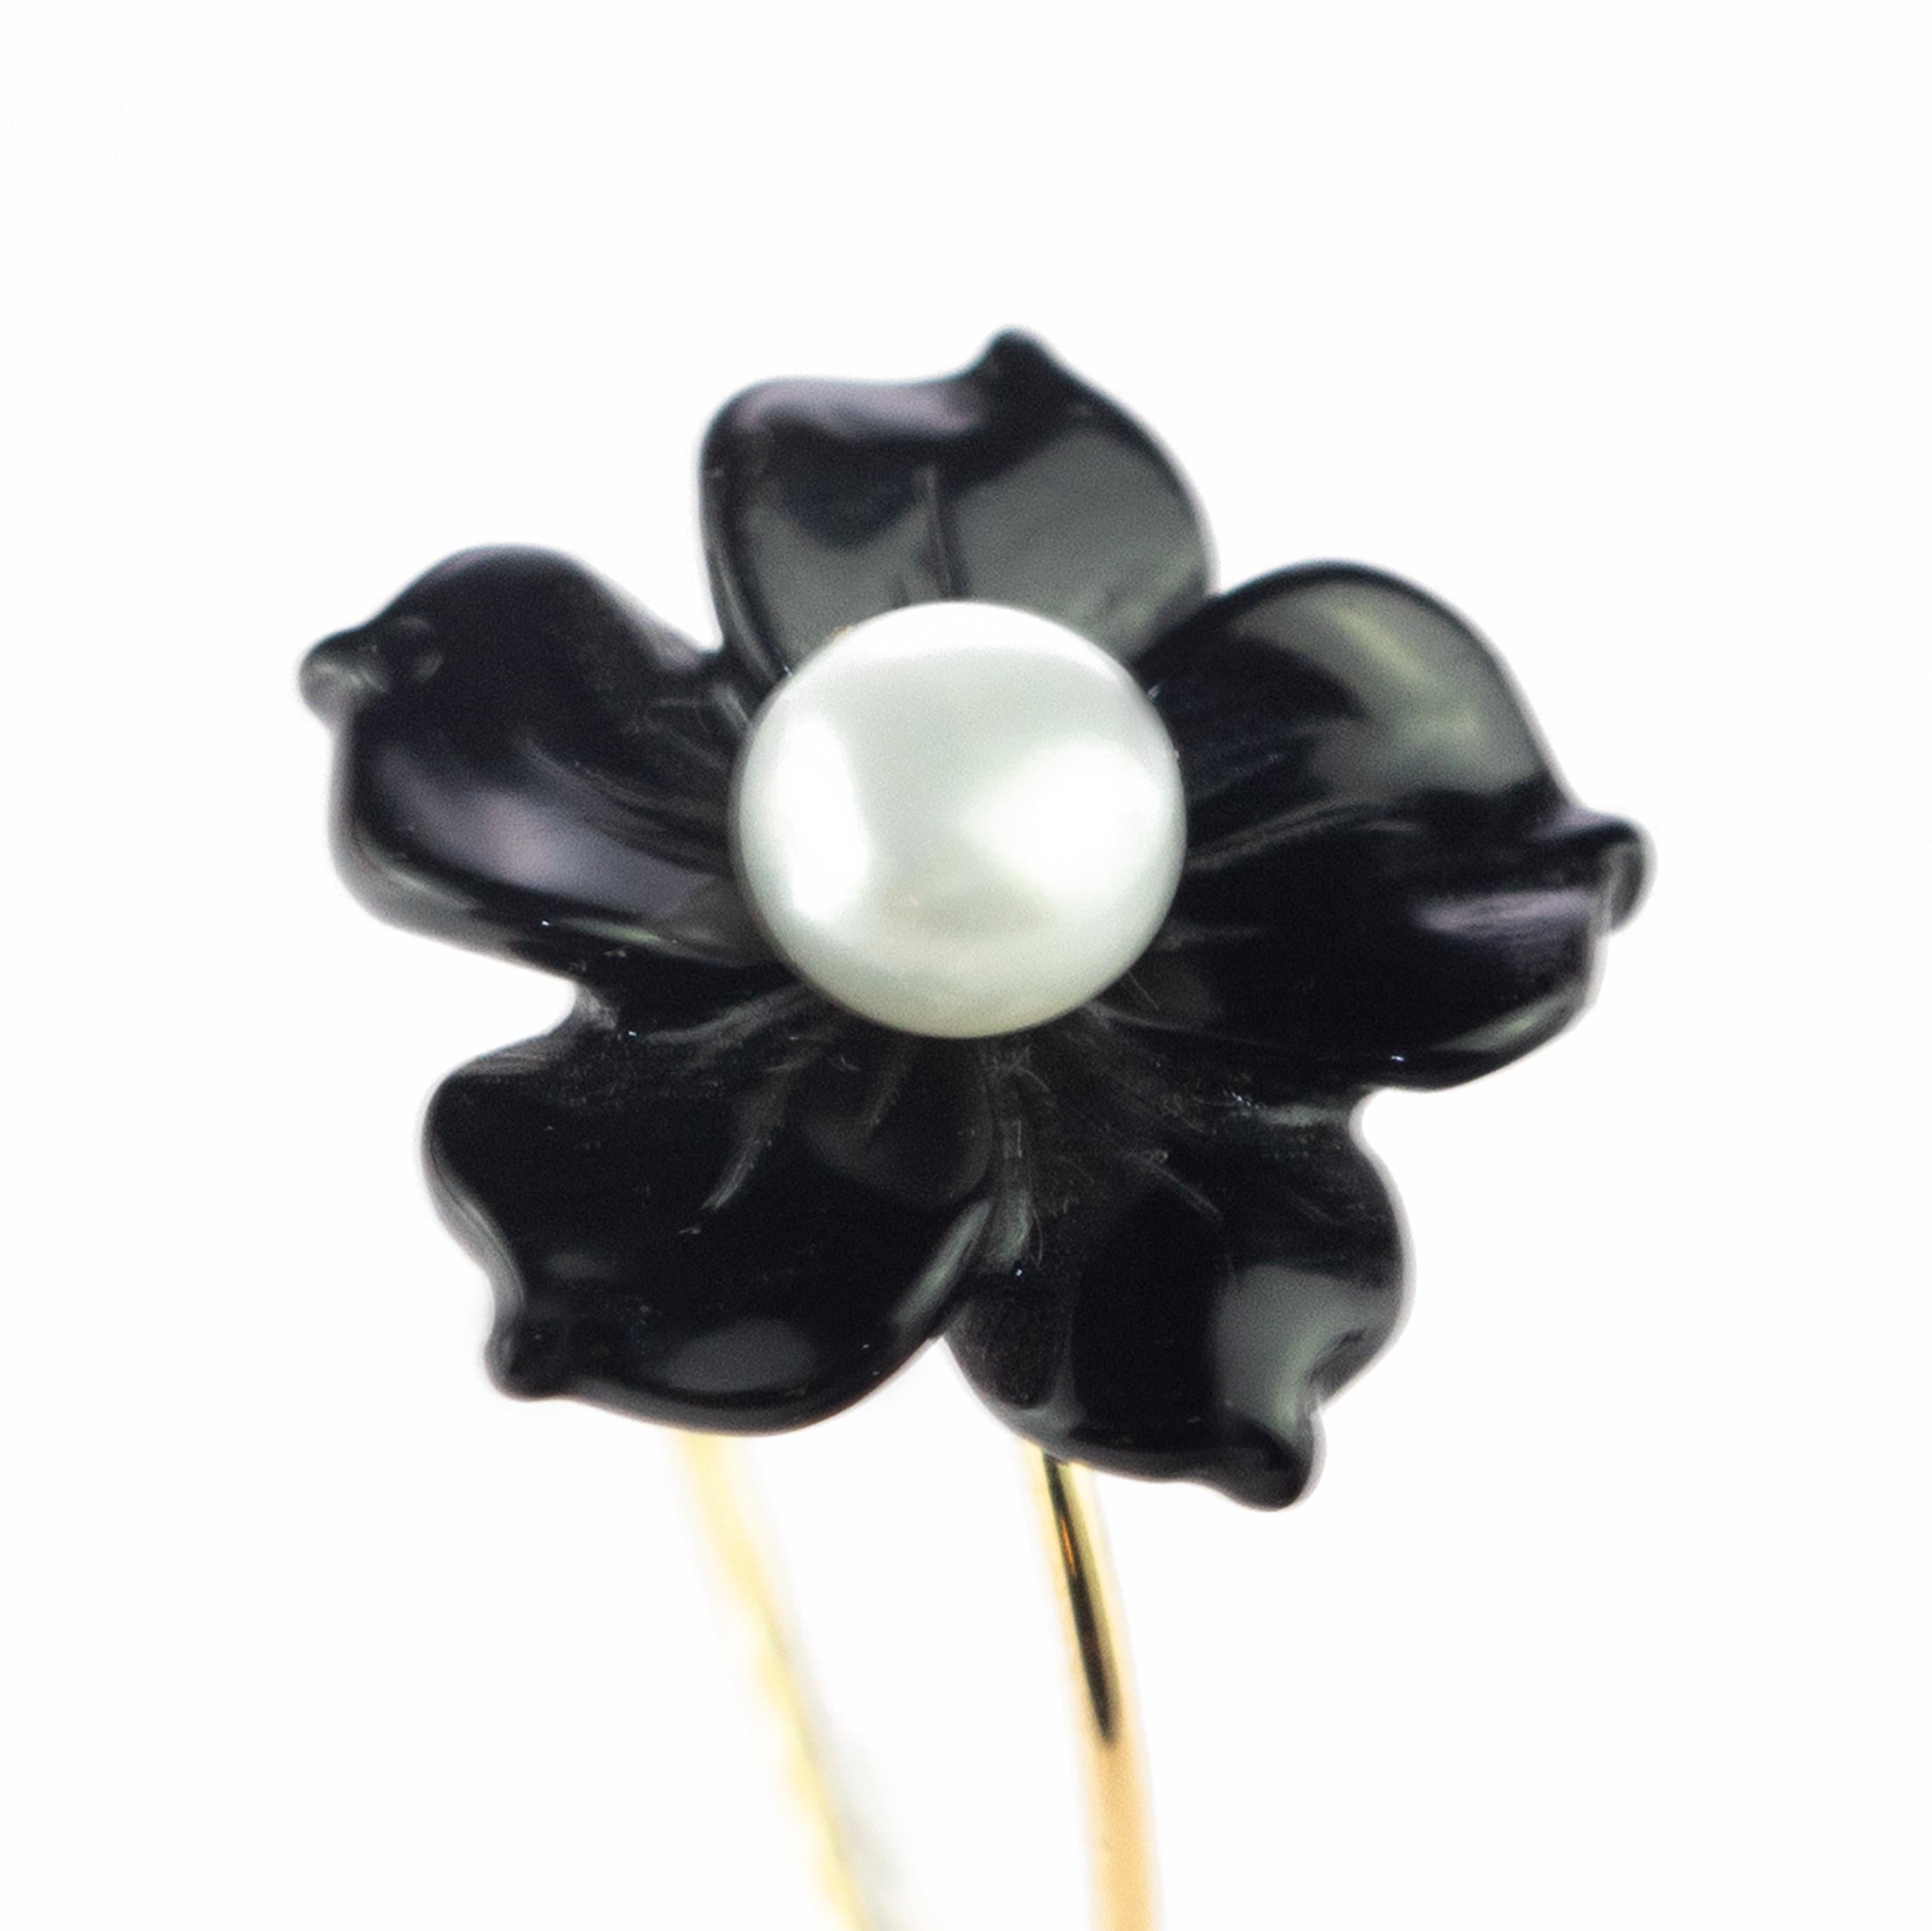 Astonishing and delicate 3.5 carat black agate flower ring, with a central 1 carat freshwater pearl. Carved petals that evoke the italian handmade traditional jewelry work, wrapping itself in a soft look enriched with 9 karat yellow gold manifesting